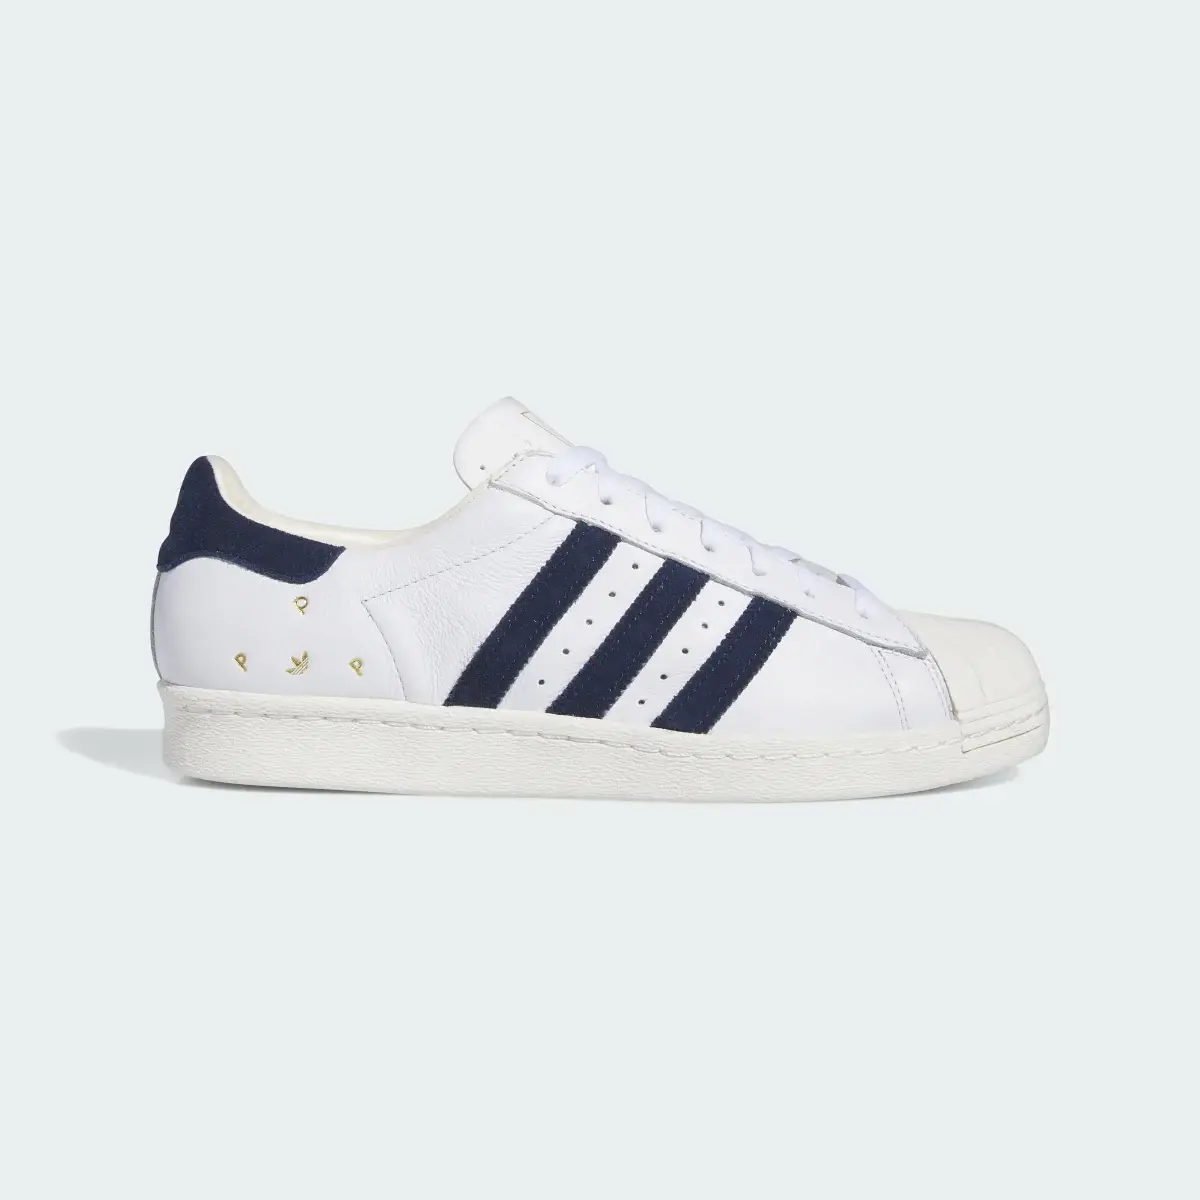 Adidas Pop Trading Co Superstar ADV Trainers. 2